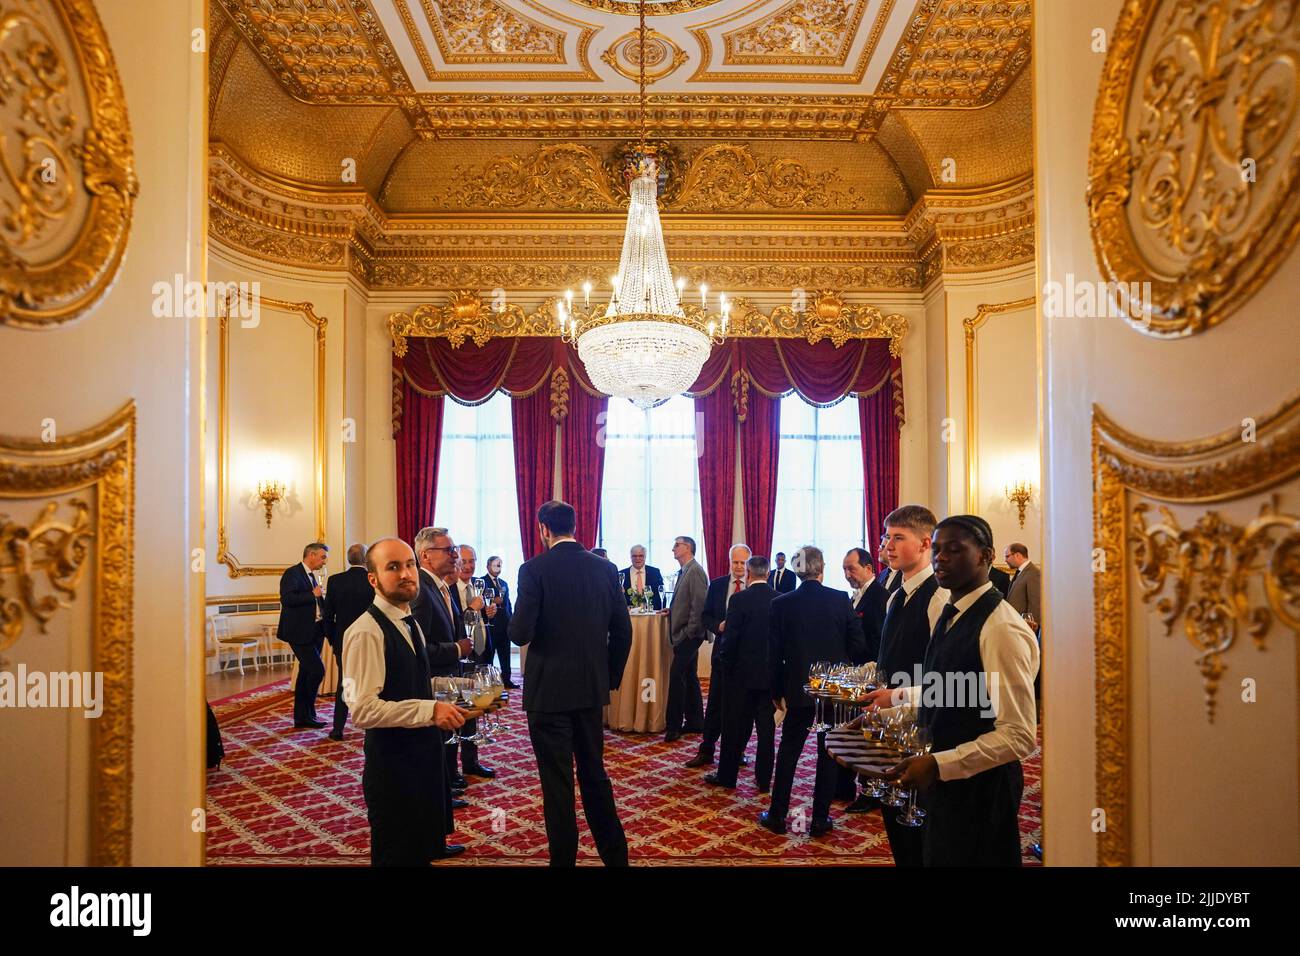 A reception room in Lancaster House in Mayfair, London, which was used in the filming of The Crown. Photo date: Thursday, March 31, 2022. Photo: Richa Stock Photo